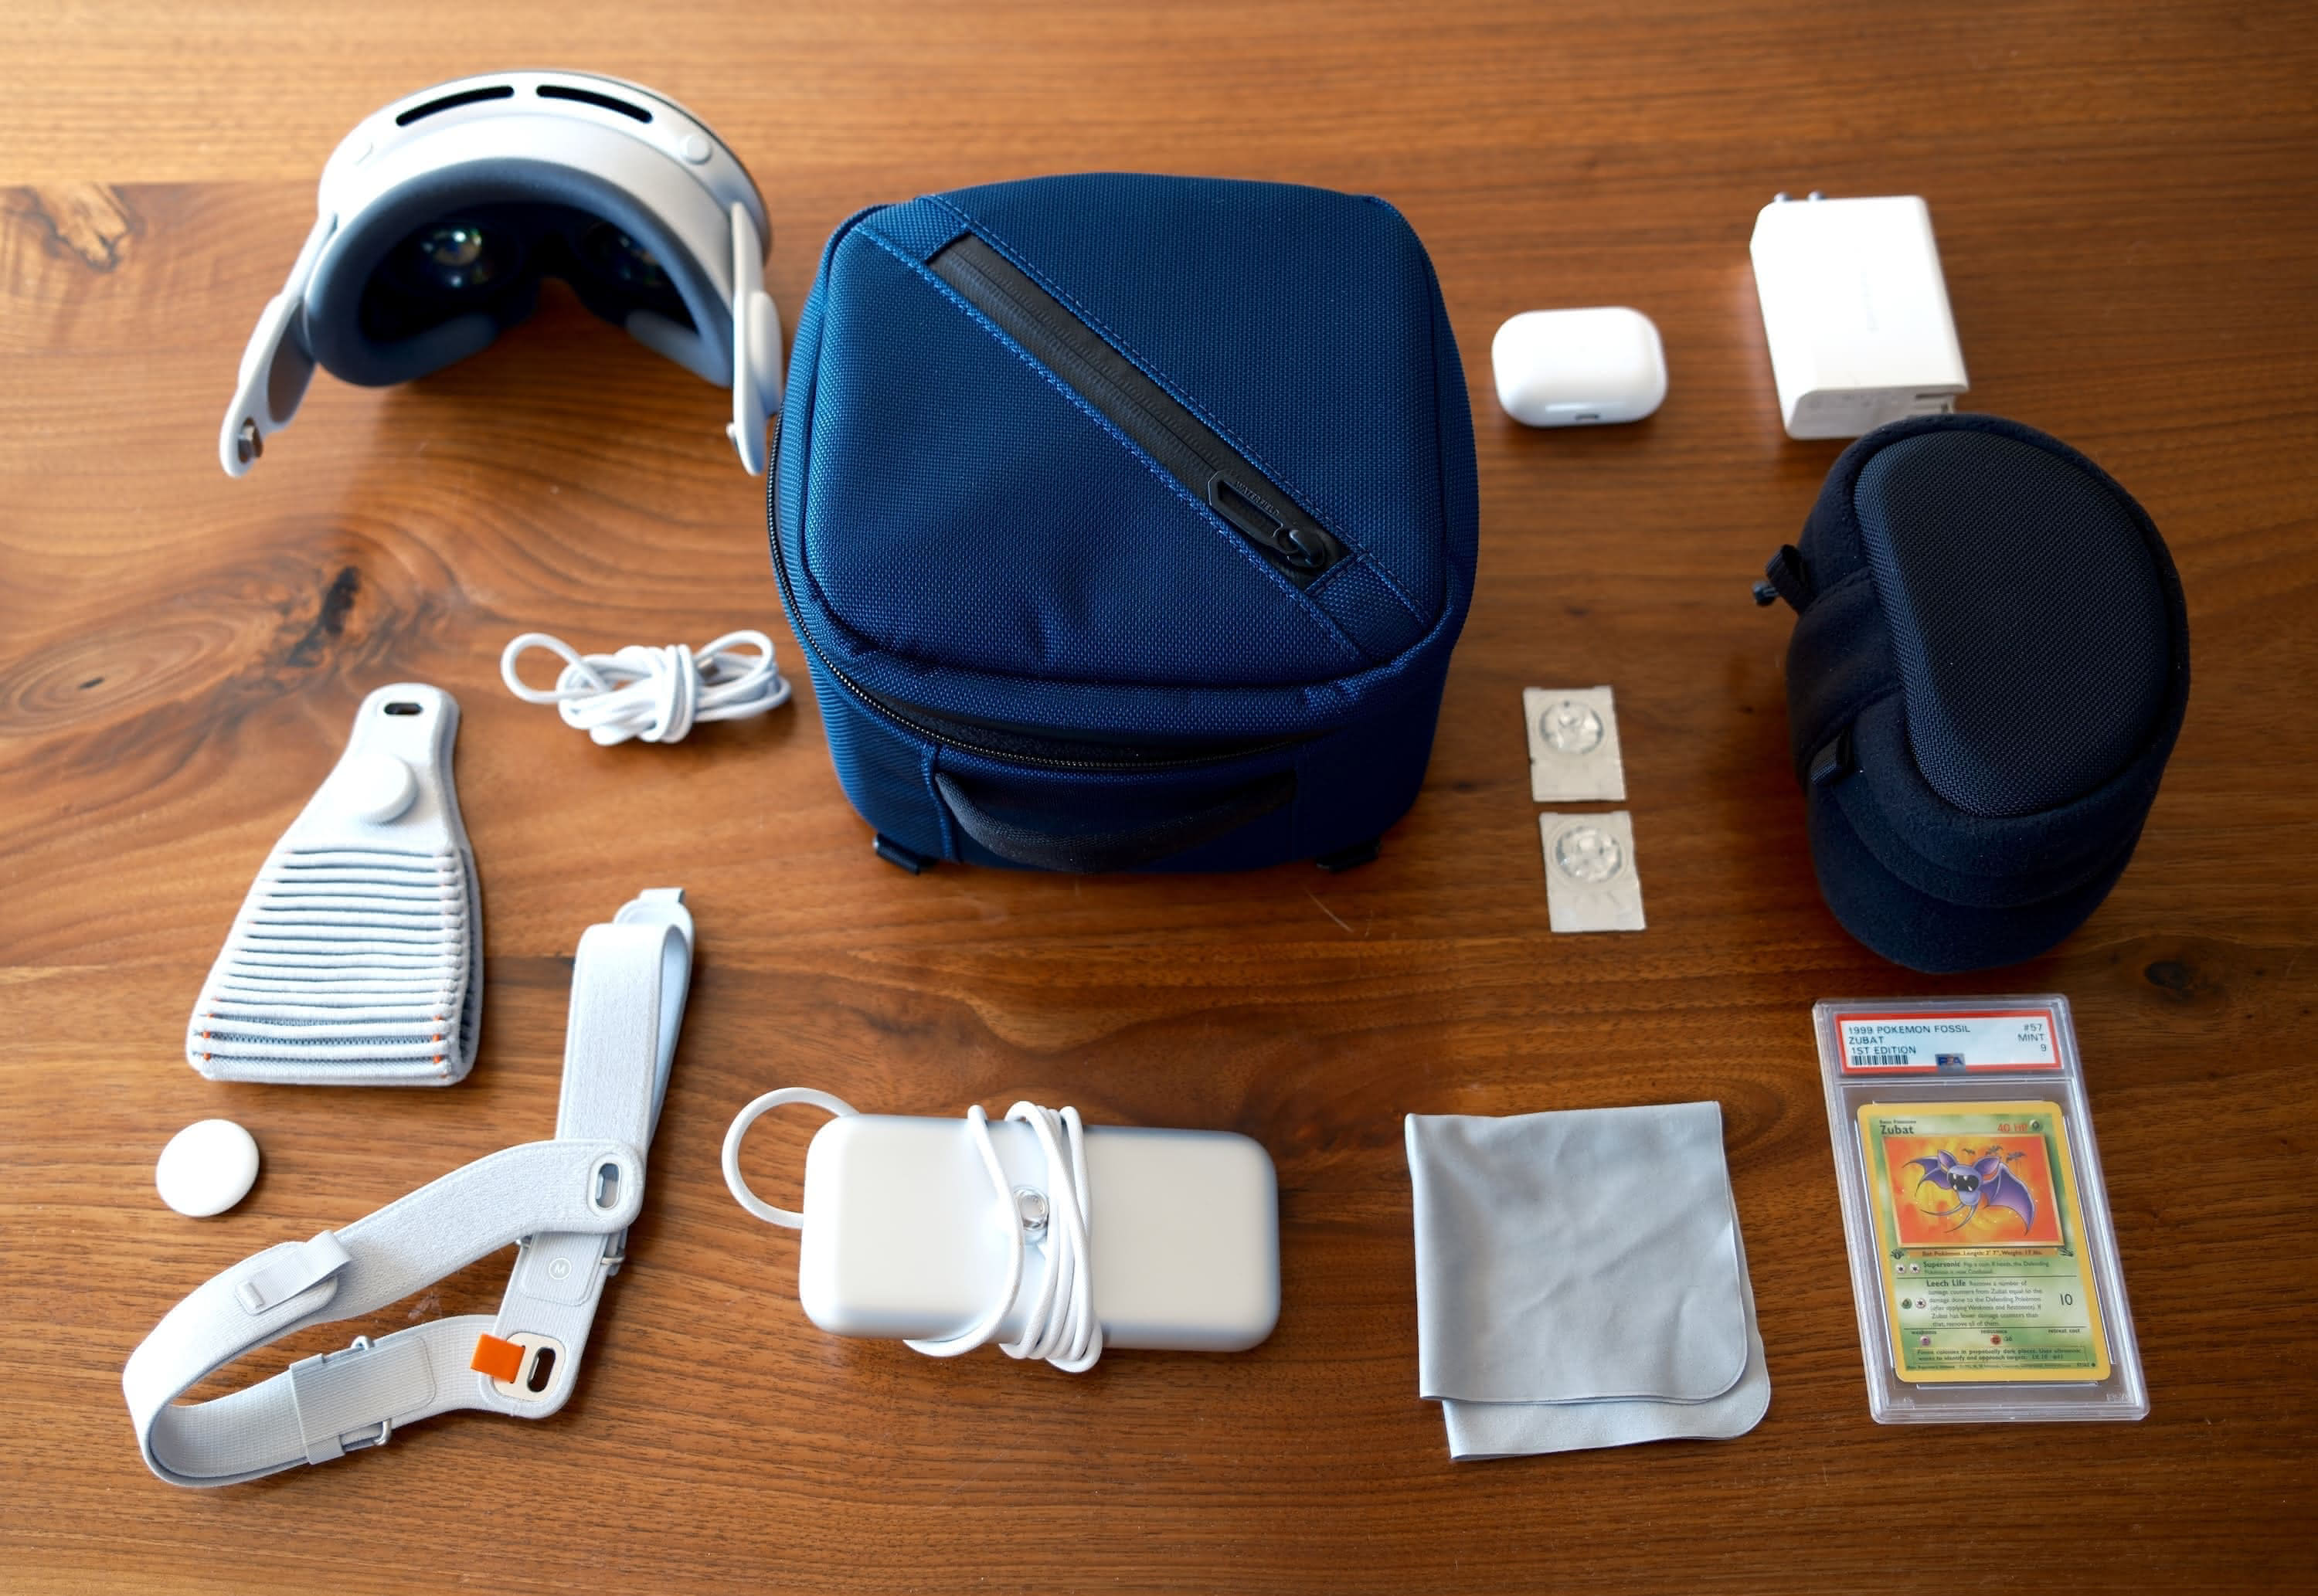 The case on a table showing the items it can carry, including the Vision Pro, a USB-C cable, the two included headbands, an AirTag, the battery, AirPods Pro, a polishing cloth, a PSA 9 first edition Zubat Pokémon card, the inner fleece case, two contact lenses, and a charging brick.